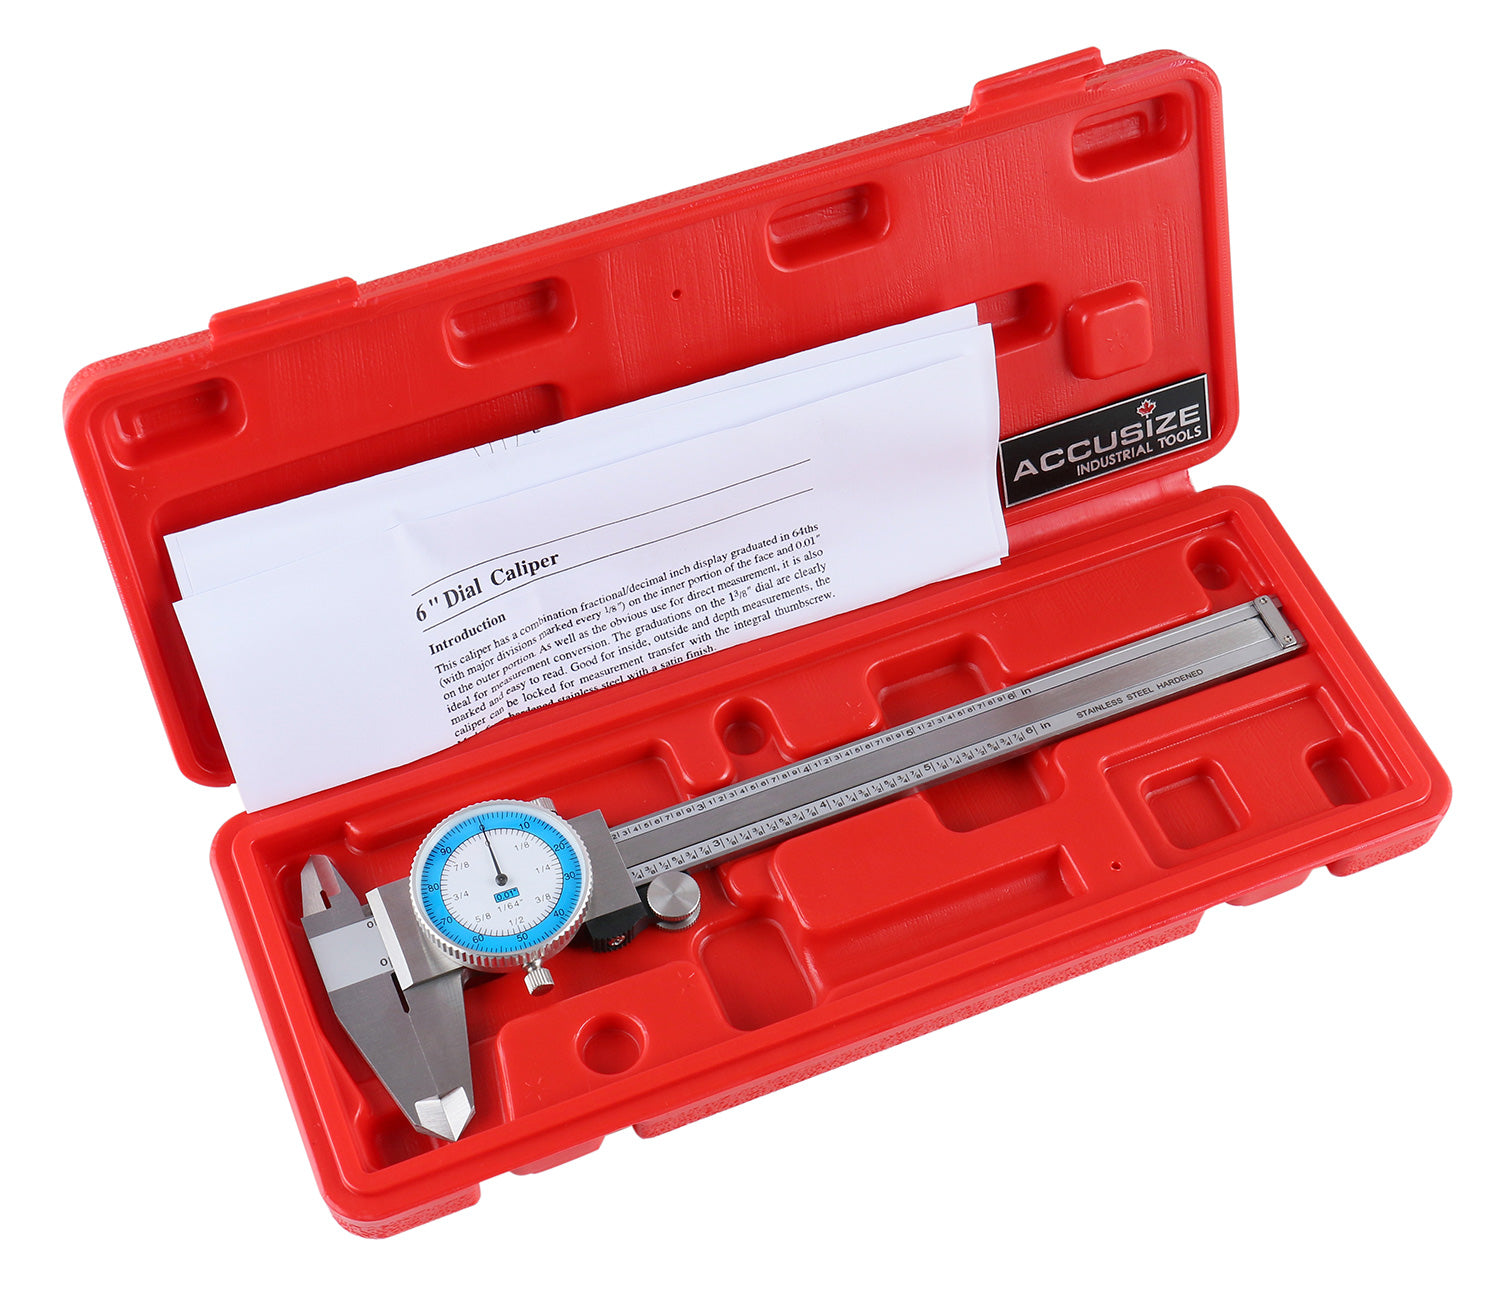 P132-2150 Accusize Industrial Tools 0-6 Inch Stainless Steel Fractional Dial Caliper